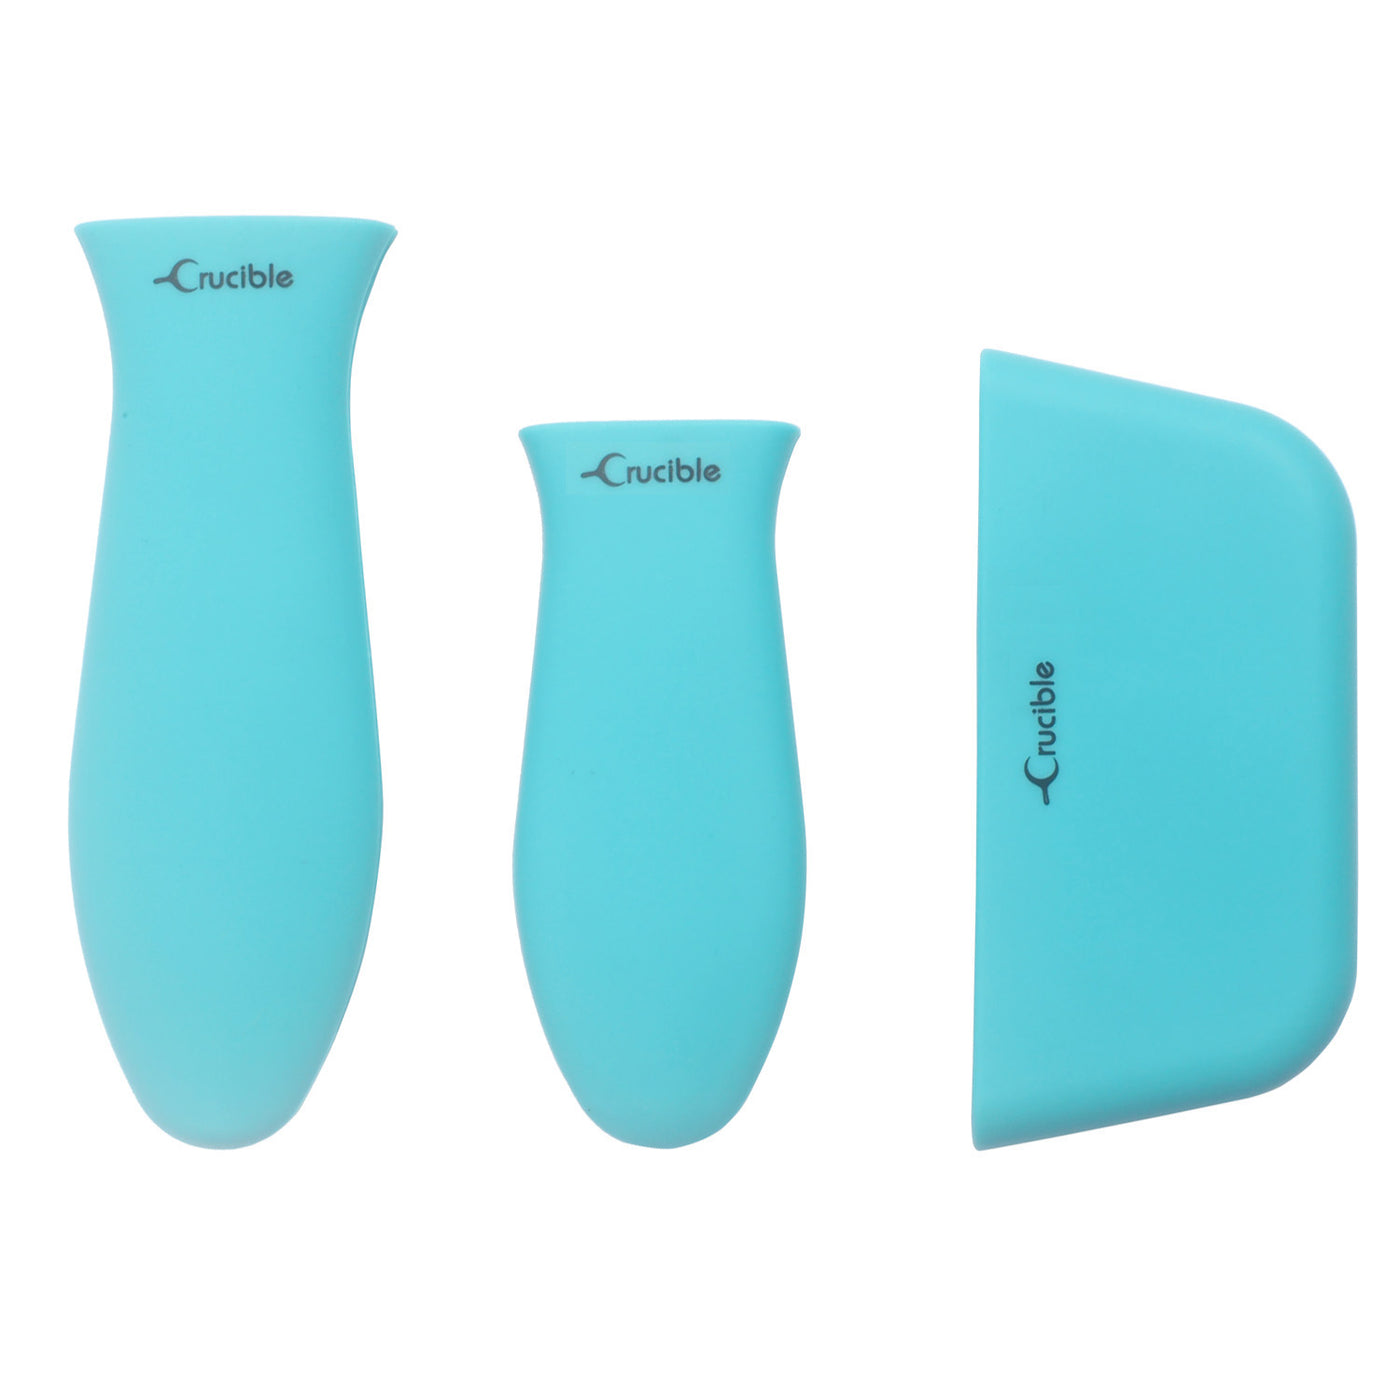 Silicone Potholders (3-Pack Mix Turquoise) for Cast Iron Skillet